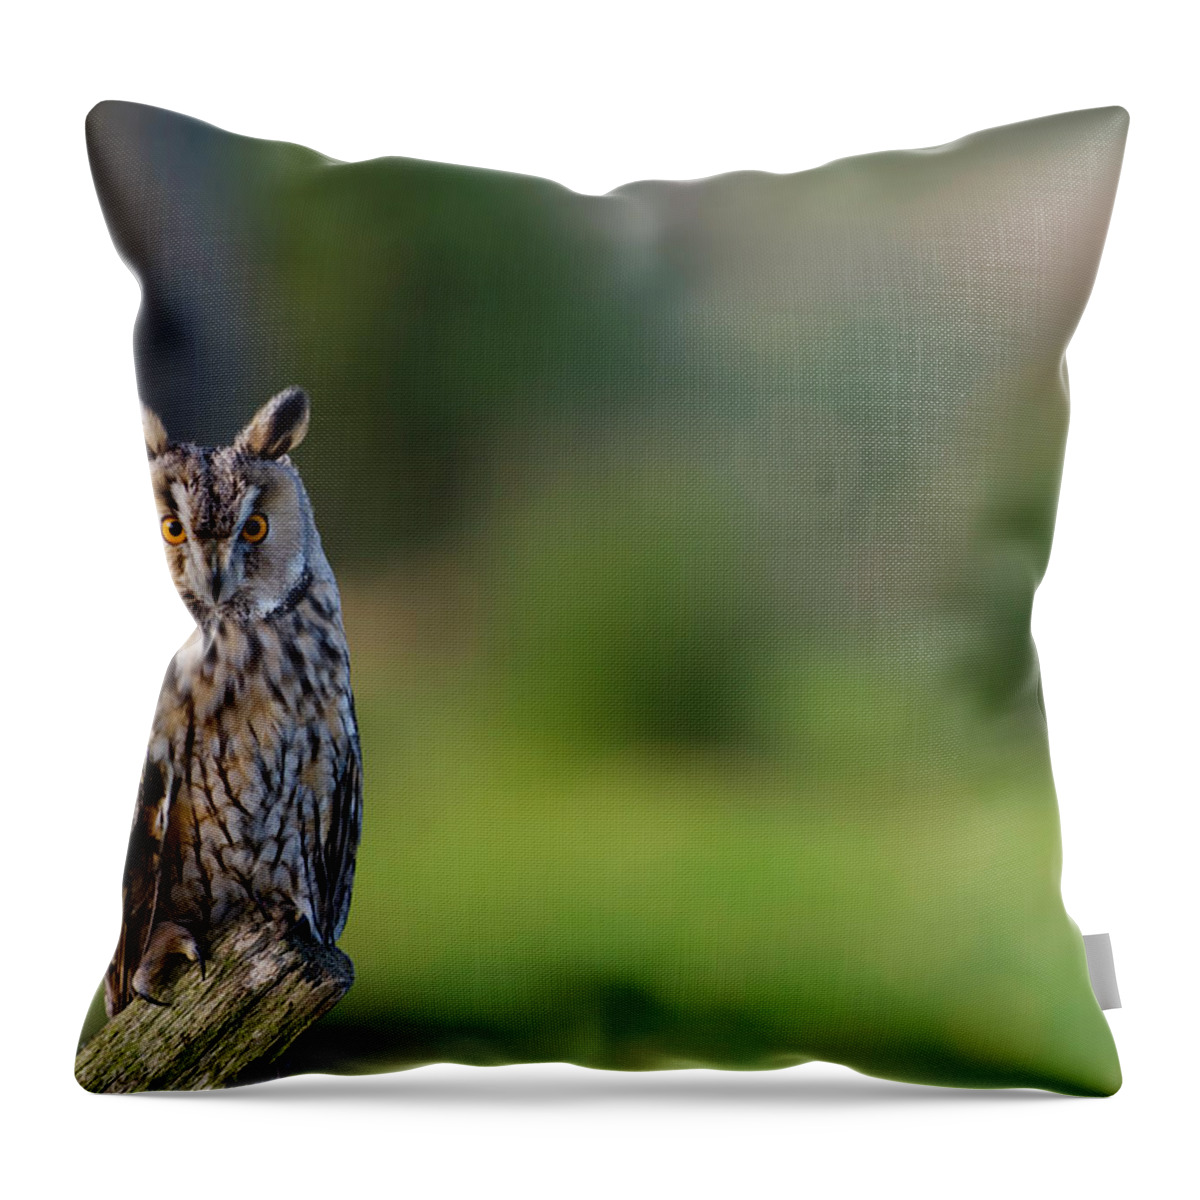 England Throw Pillow featuring the photograph Long-eared Owl Asio Otus Perched On by Mike Powles